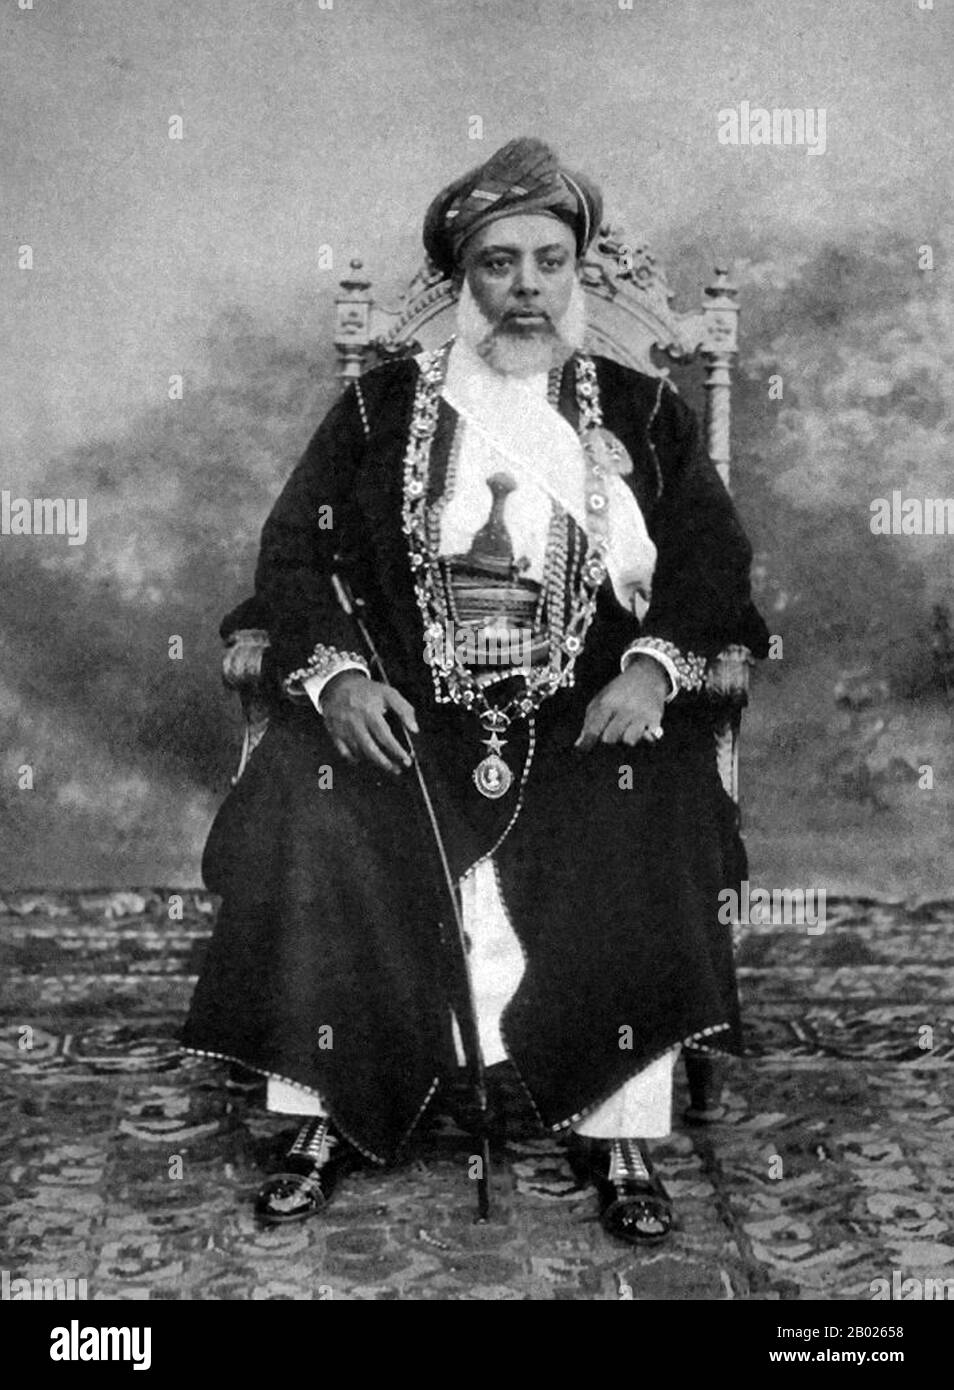 Sayyid Sir Hamoud bin Mohammed Al-Said, GCSI, (1853 - July 18, 1902) (ruled August 27, 1896 - July 18, 1902) (Arabic: حمود بن محمد) was the British-controlled Omani sultan of the protectorate of Zanzibar, who outlawed slavery on the island.  Hamoud became sultan with the support of the British consul, Sir Basil Cave, upon the death of Hamad bin Thuwaini. Before he could enter the palace, another potential contender for the throne, Khalid bin Barghash, seized the palace and declared himself sultan. The British responded the next day, August 26, 1896, by issuing an ultimatum to Khalid and his e Stock Photo